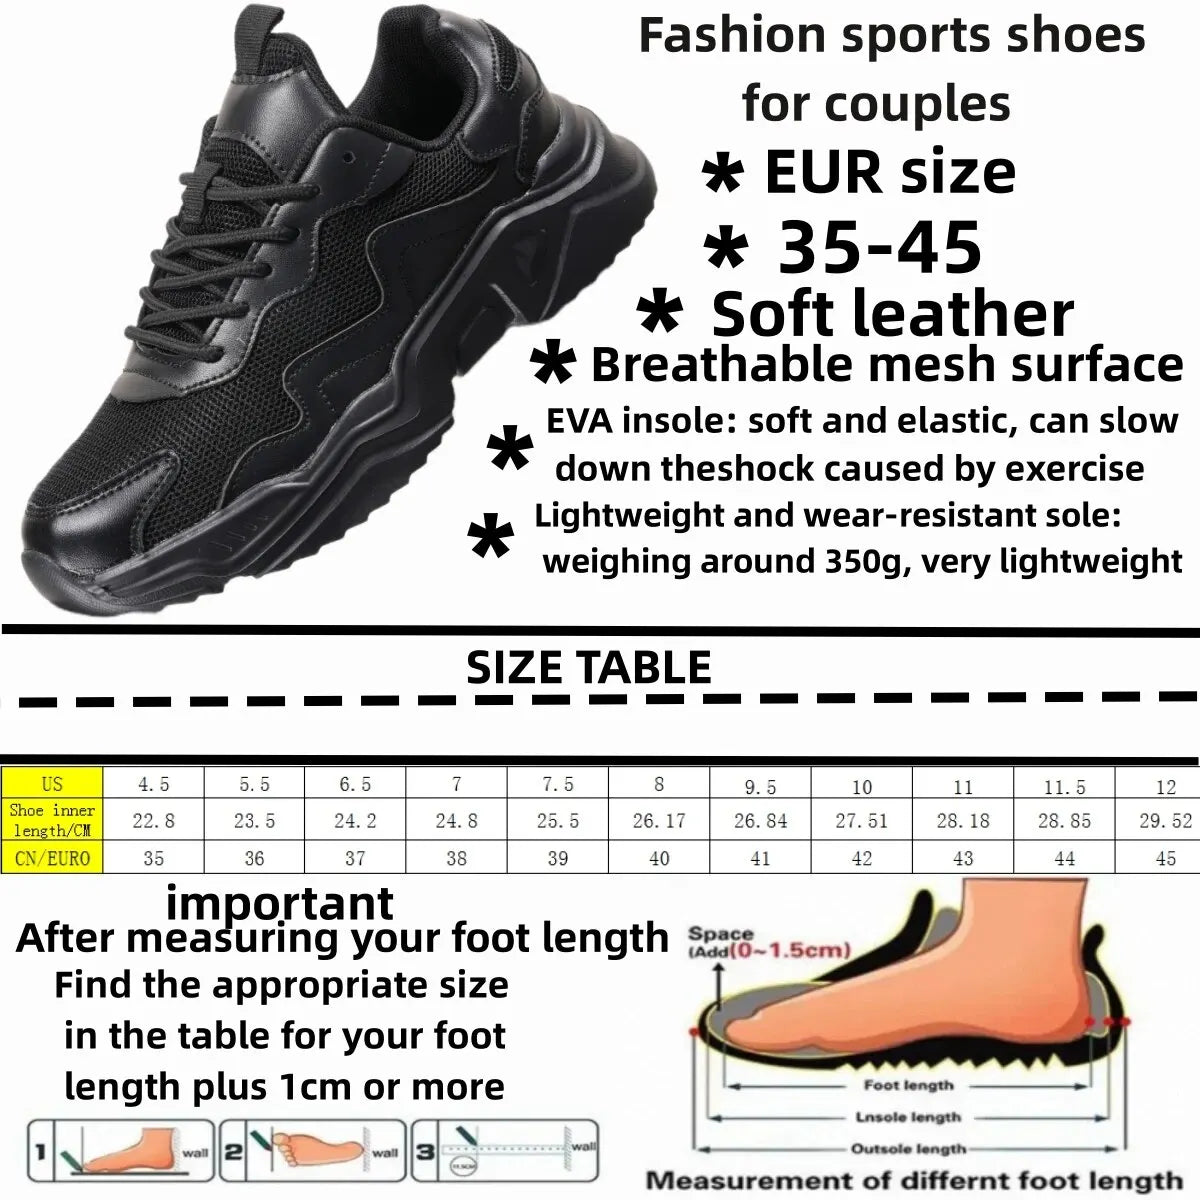 Unisex Casual Sports  Ultra-light, Sneakers